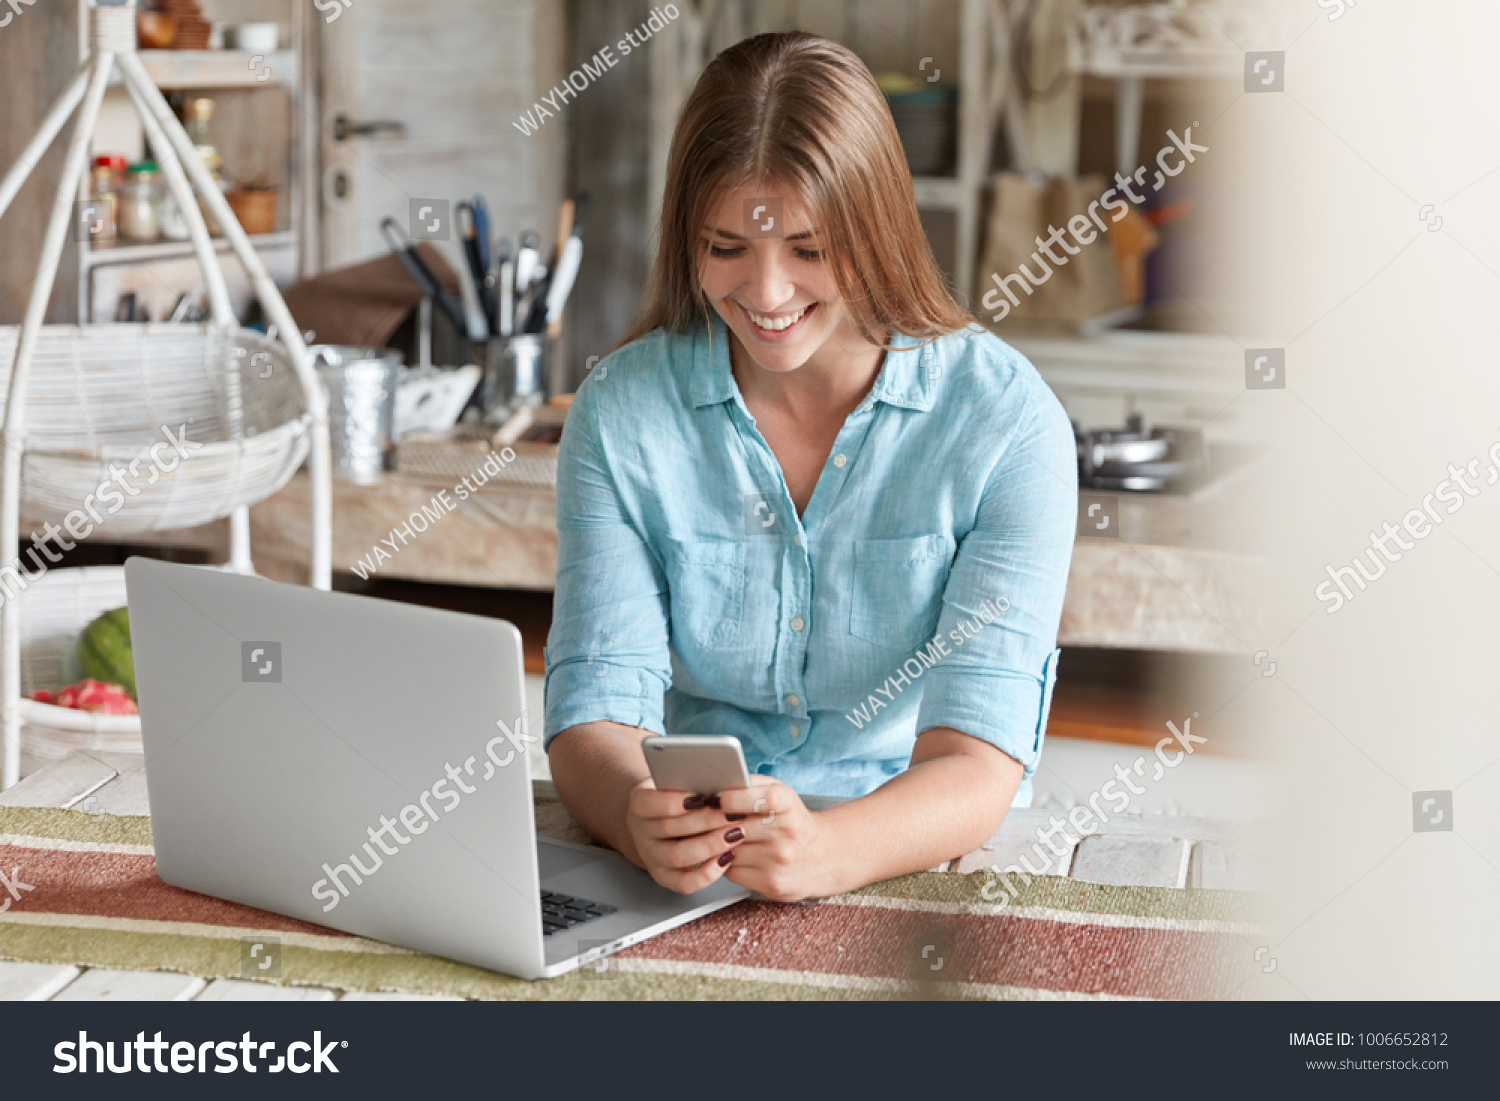 Satisfied young female freelancer works remotely, sits against kitchen interior, glad to recieve message on smart phone, types answer. Modern technology, communication and lifestyle concept. #1006652812